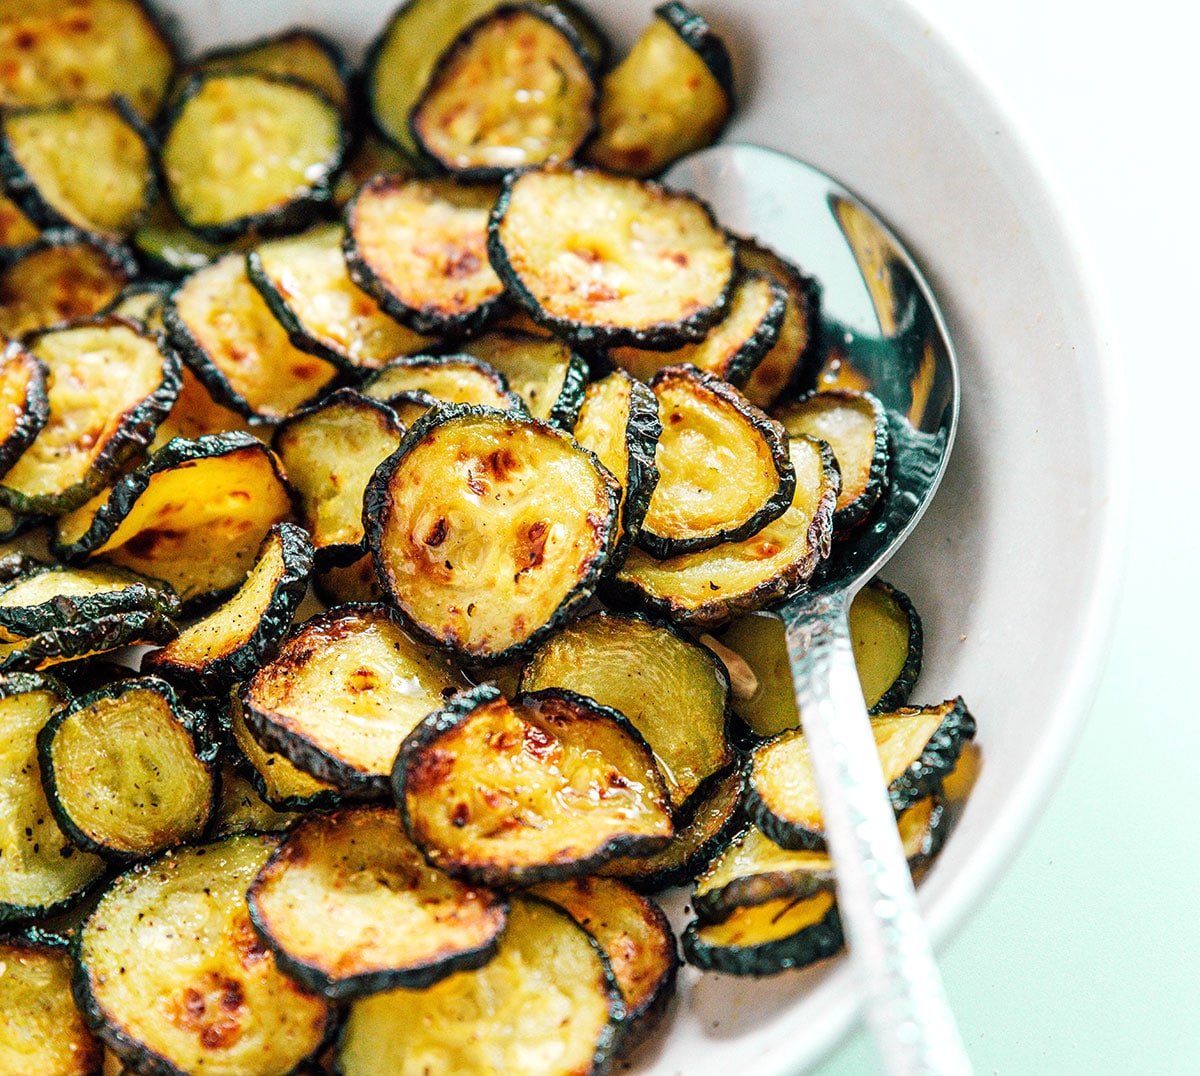 A silver spoon scooping air fried zucchini chips from a white bowl.